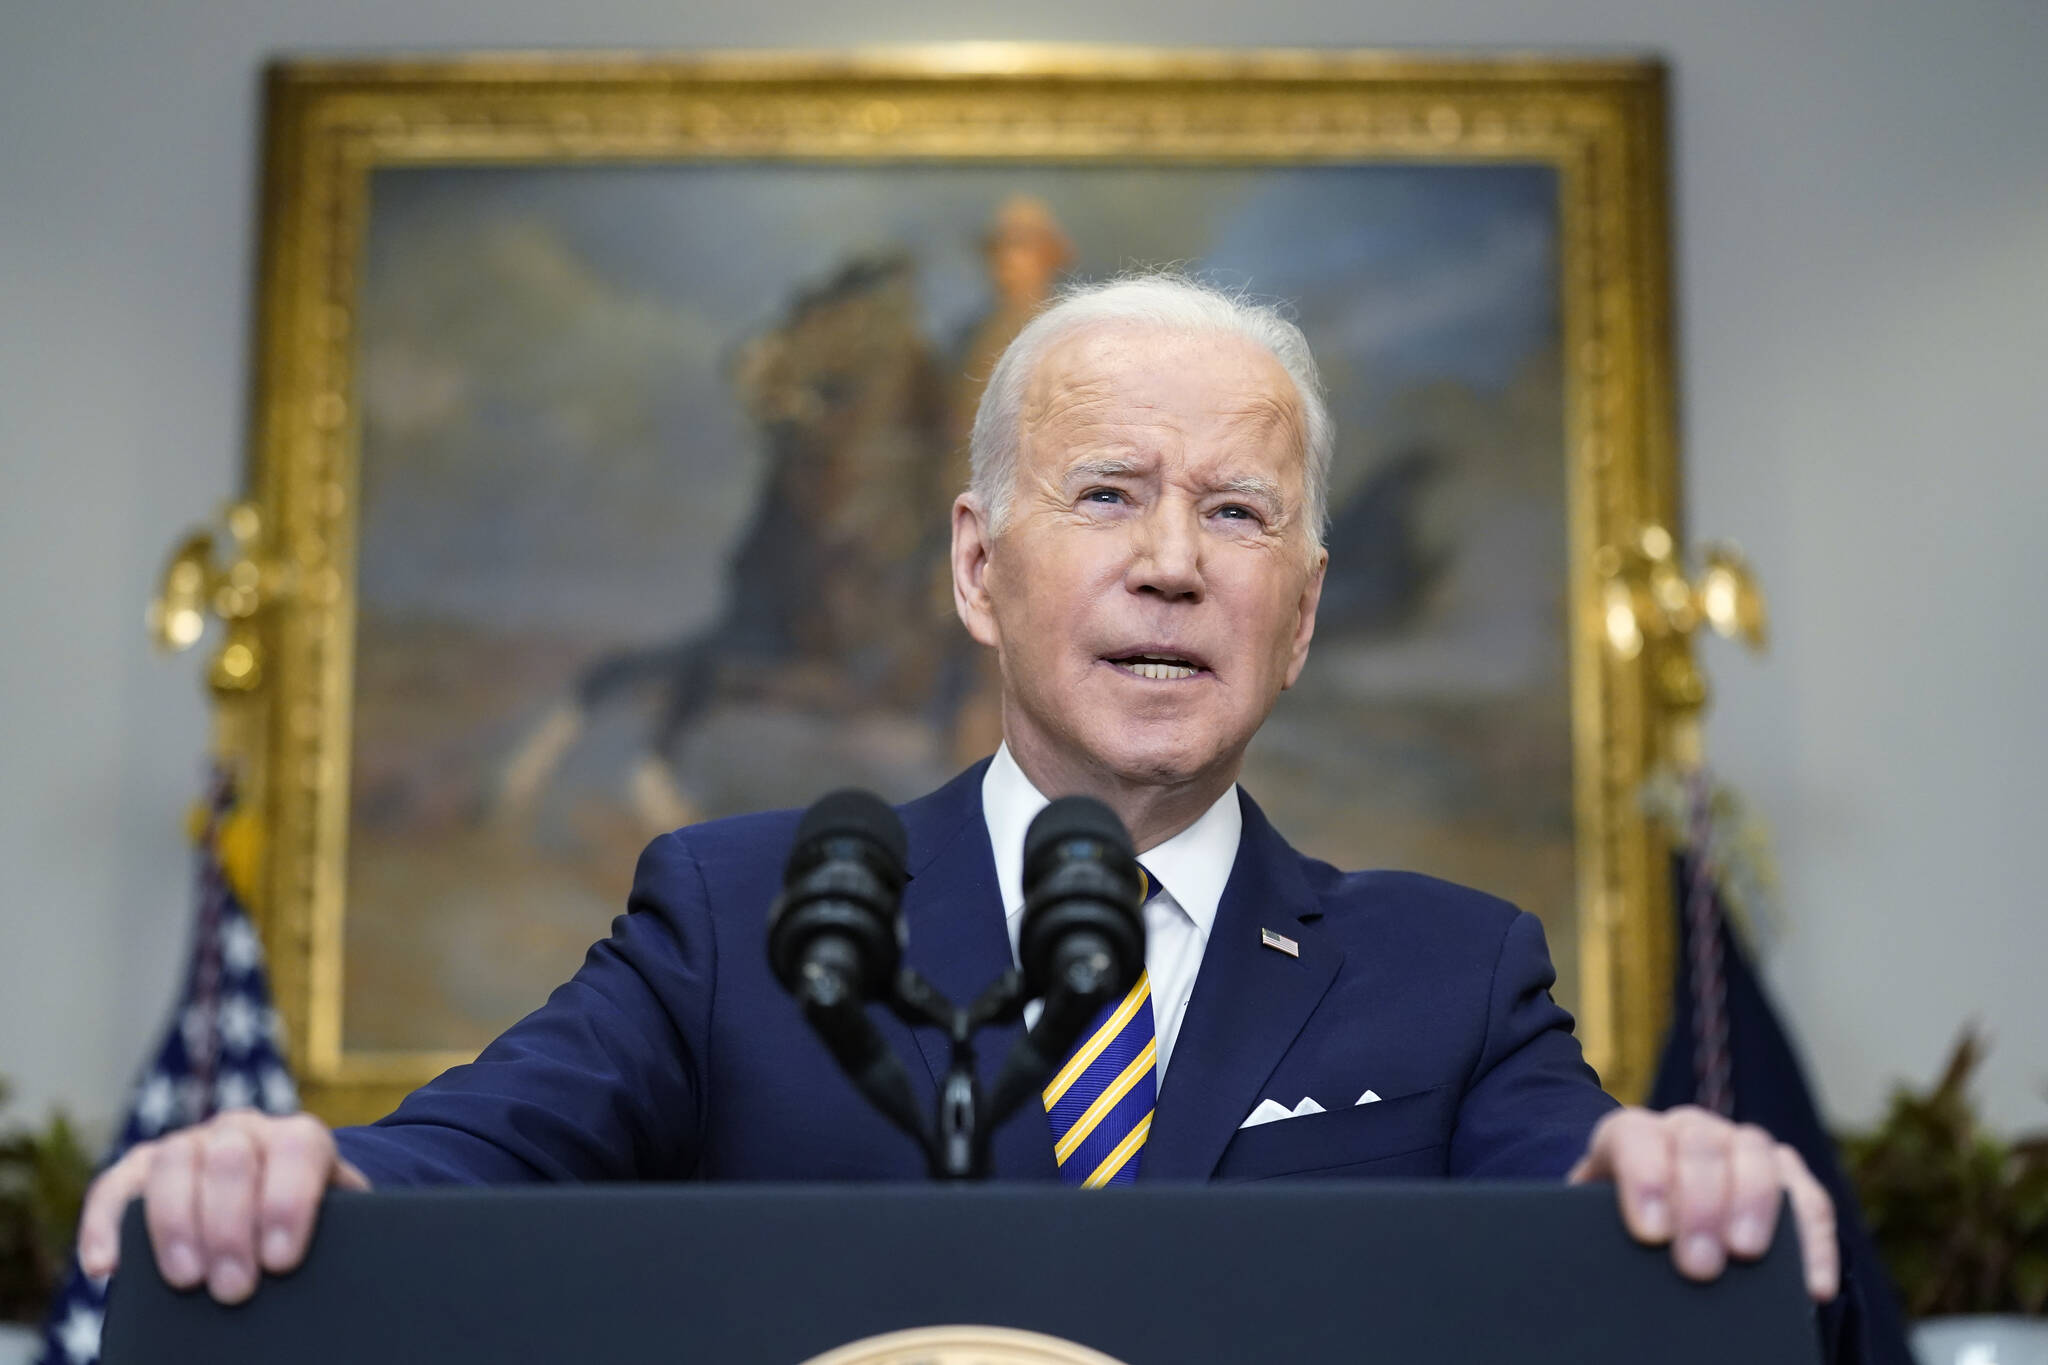 President Joe Biden announces a ban on Russian oil imports, toughening the toll on Russia's economy in retaliation for its invasion of Ukraine, Tuesday, March 8, 2022, in the Roosevelt Room at the White House in Washington. (AP Photo / Andrew Harnik)